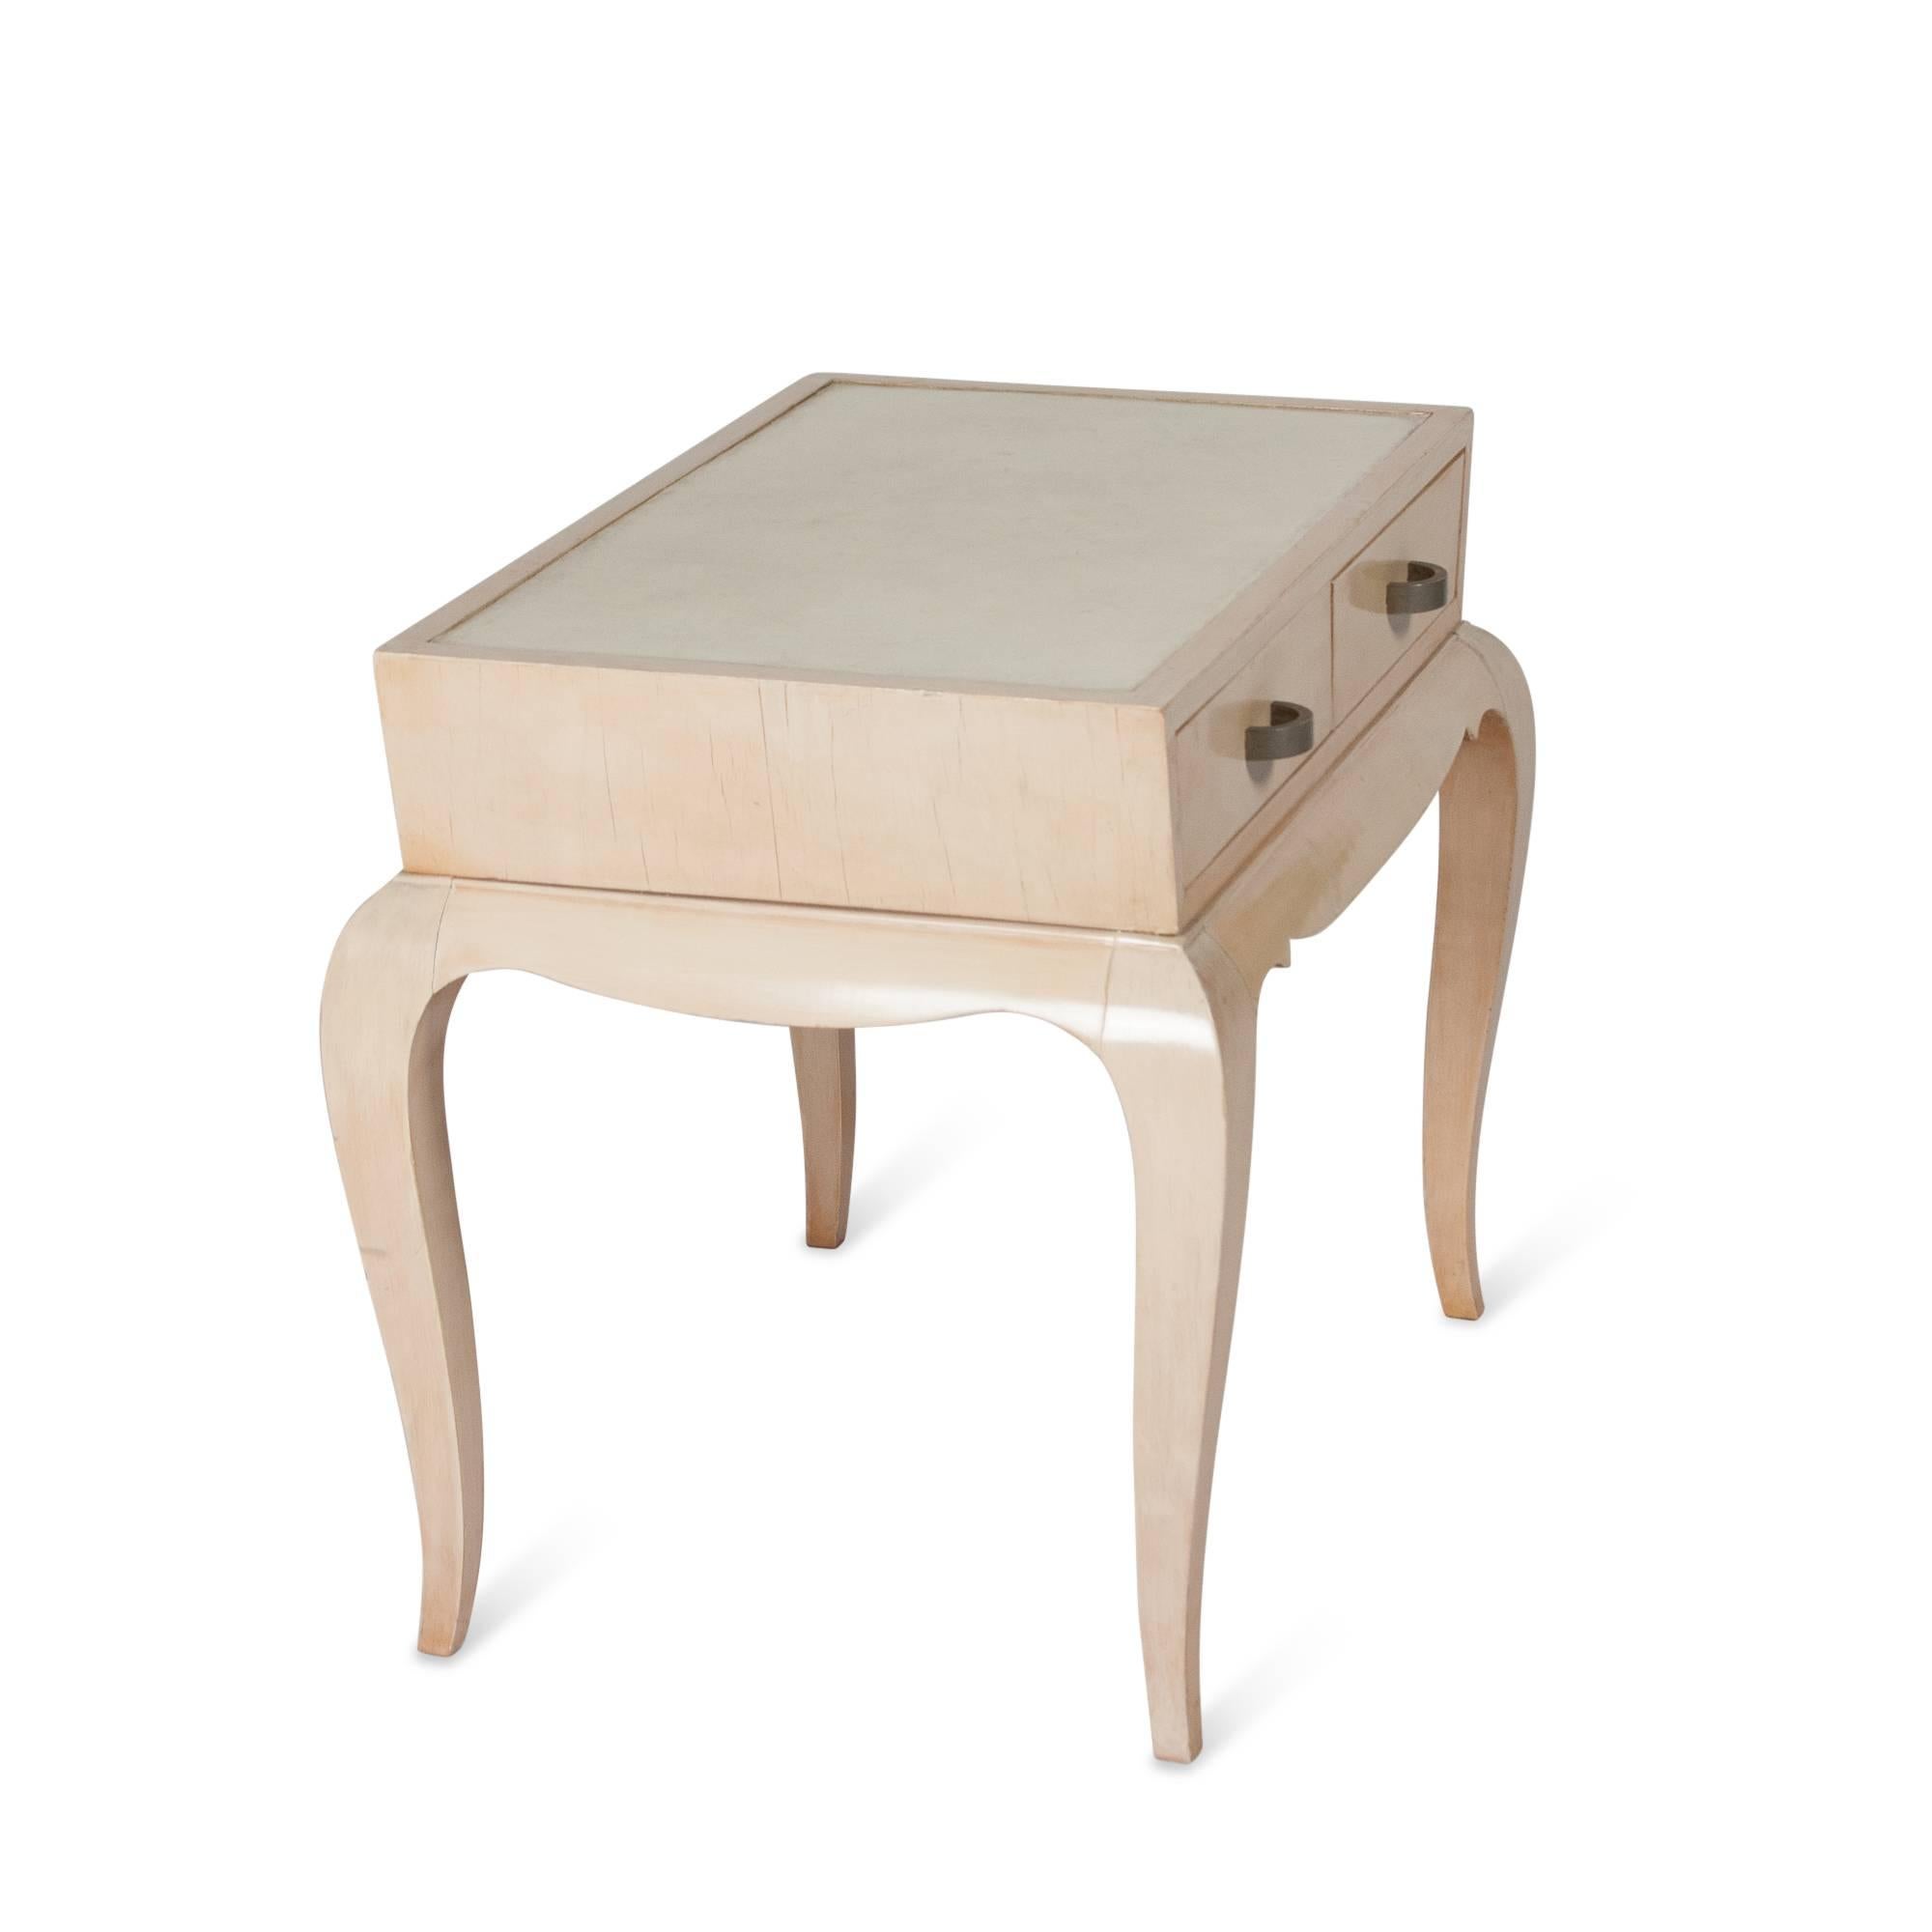 Bleached oak end table with parchment top surface and two drawers, in the style of Andre Arbus, French, 1940s. Measures: Width 22 1/2 in, depth 16 in, height 19 in.